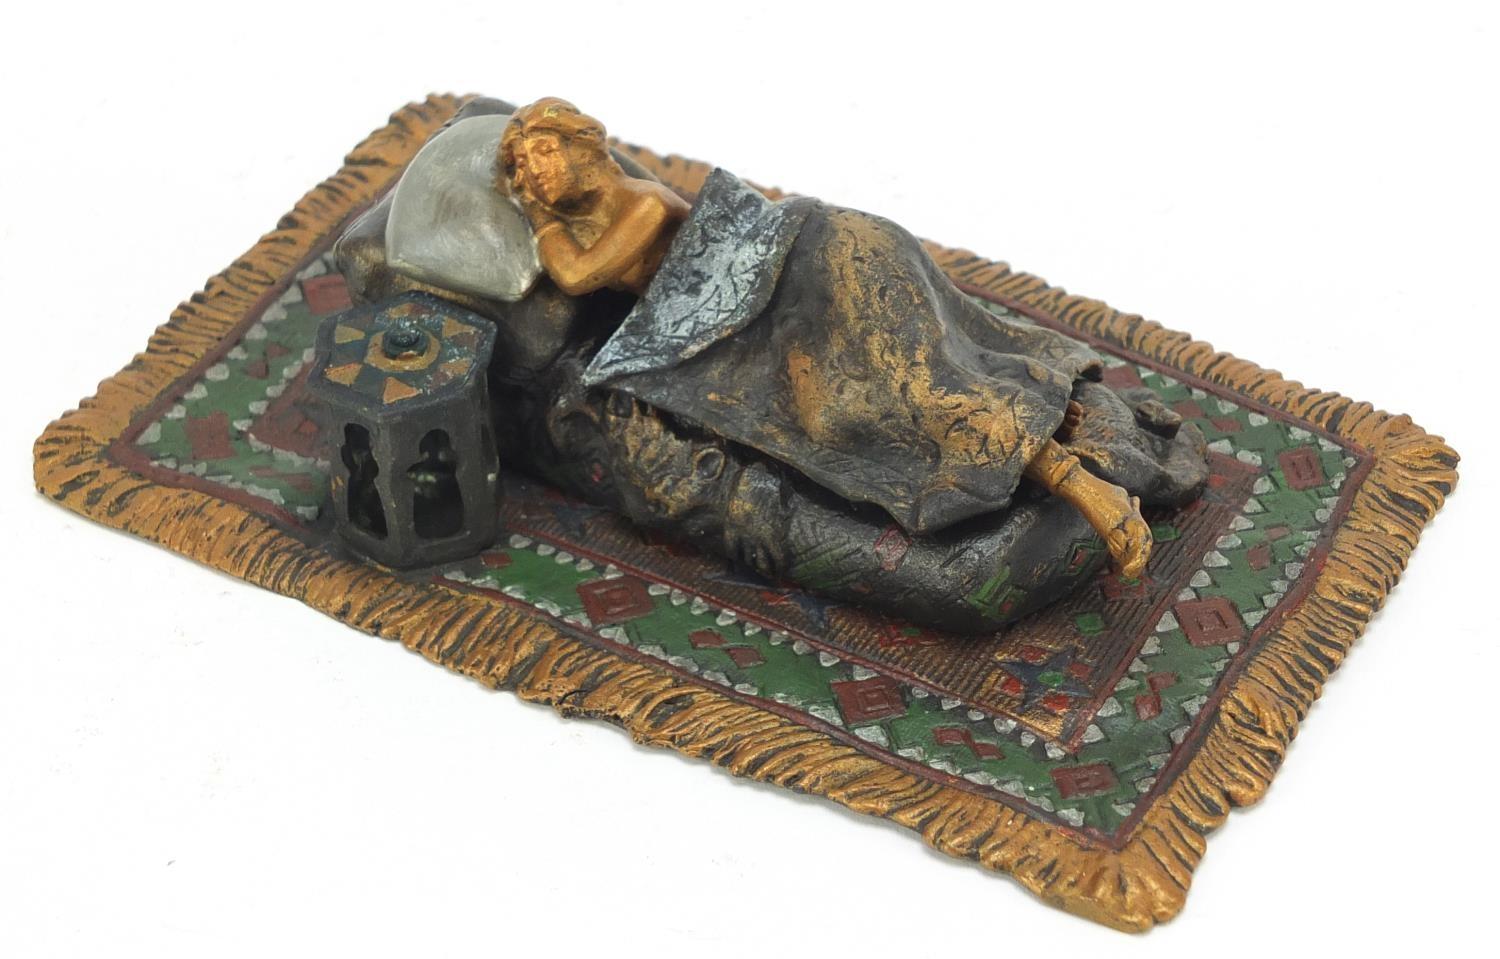 Cold painted bronze figure of a sleeping female with lift off cover in the style of Franz Xaver